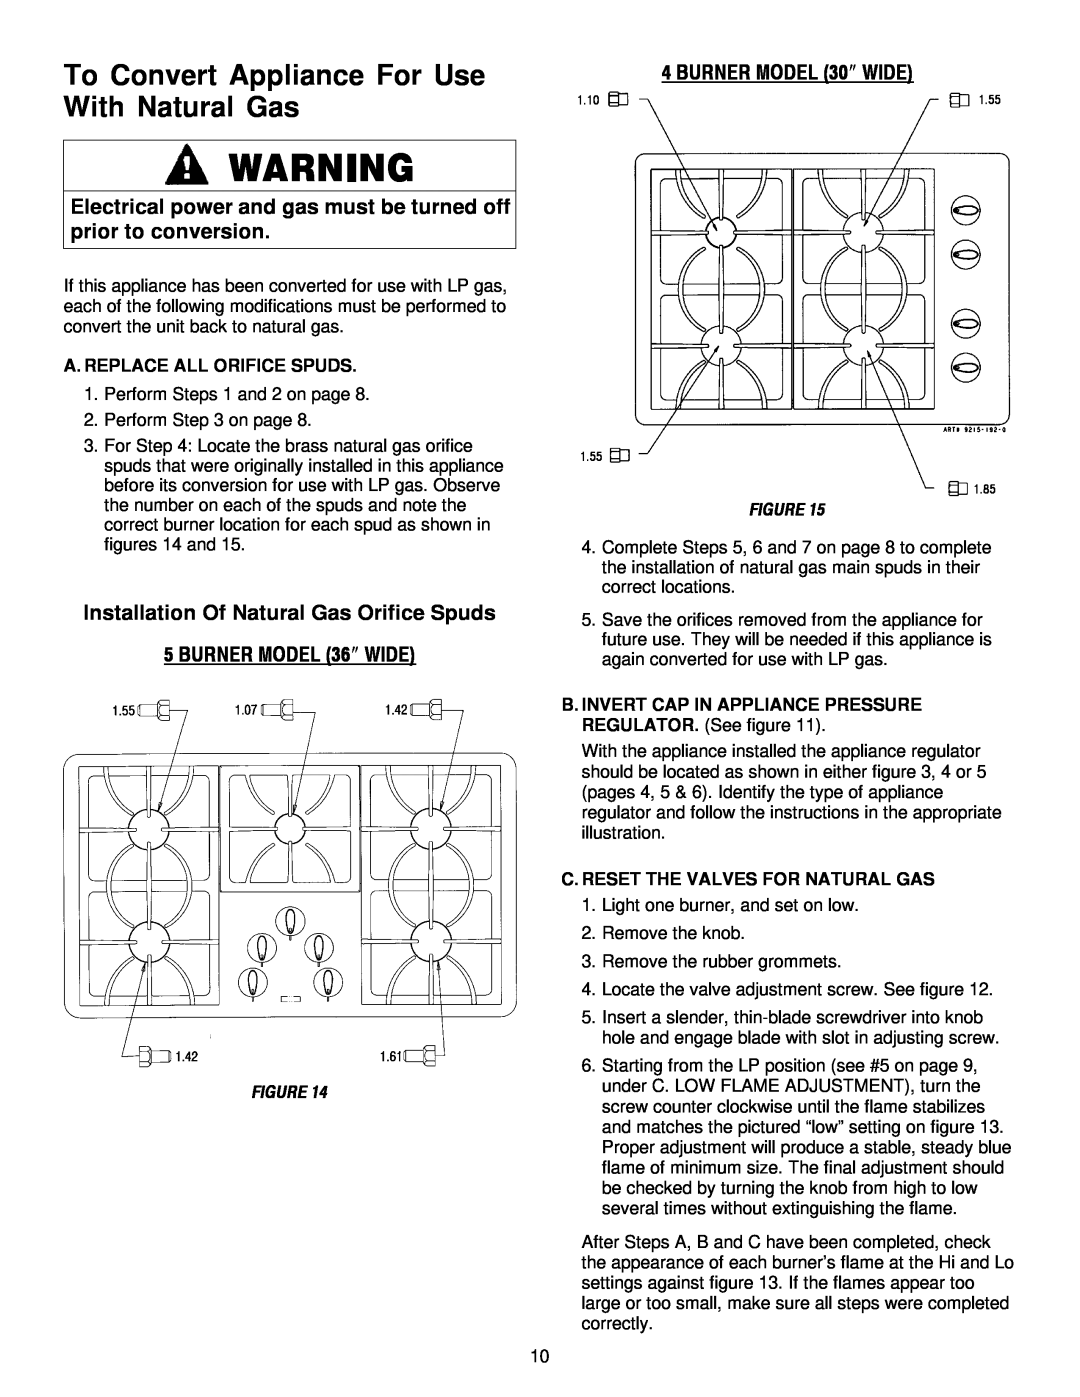 Maytag MGC5536 installation manual To Convert Appliance For Use With Natural Gas, Installation Of Natural Gas Orifice Spuds 